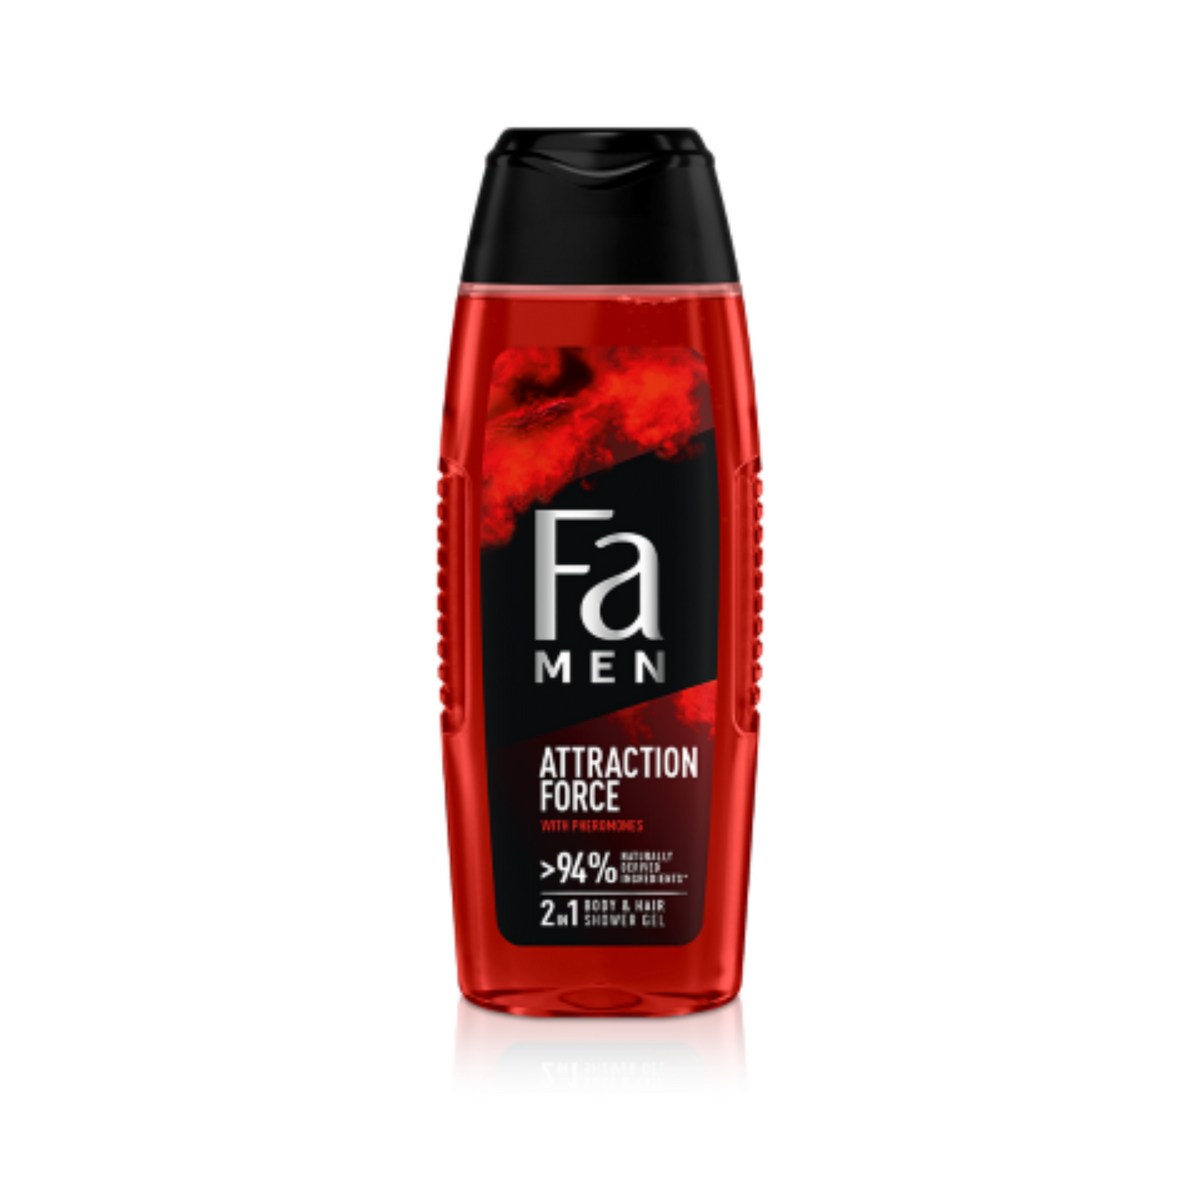 Primary image of Attraction Force Men's Shower Gel